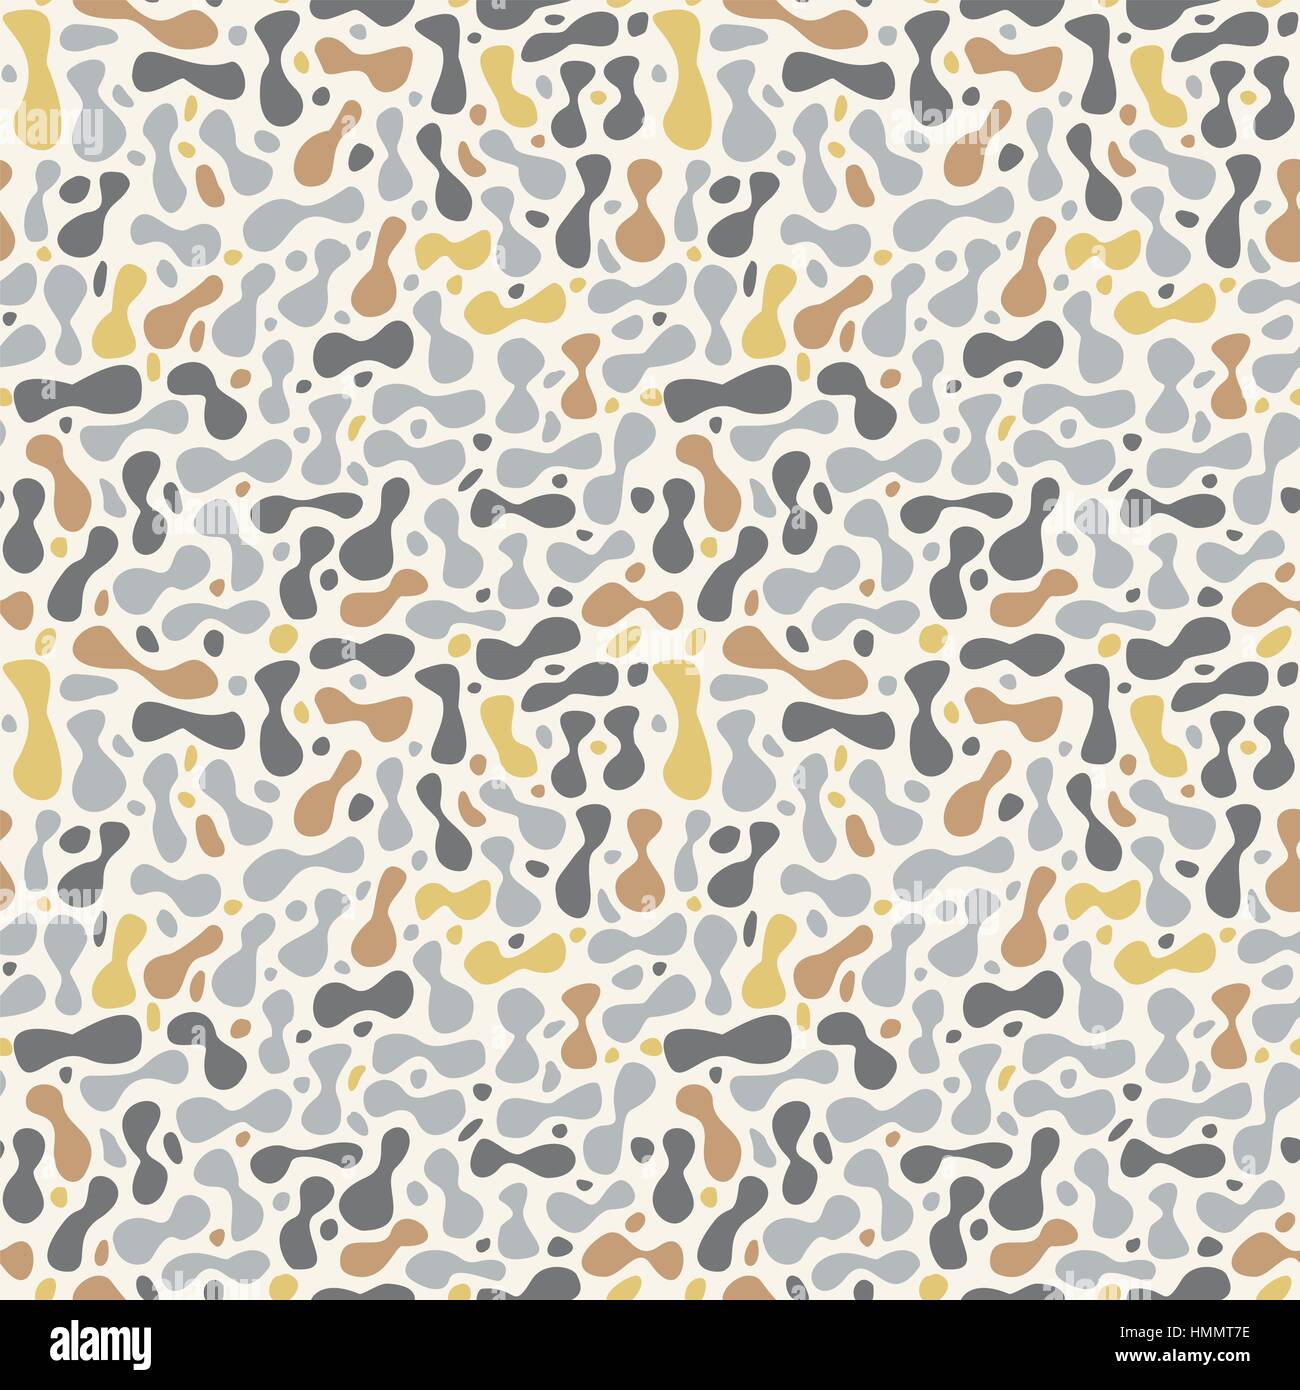 Abstract Spots Seamless Pattern Texture Stock Vector